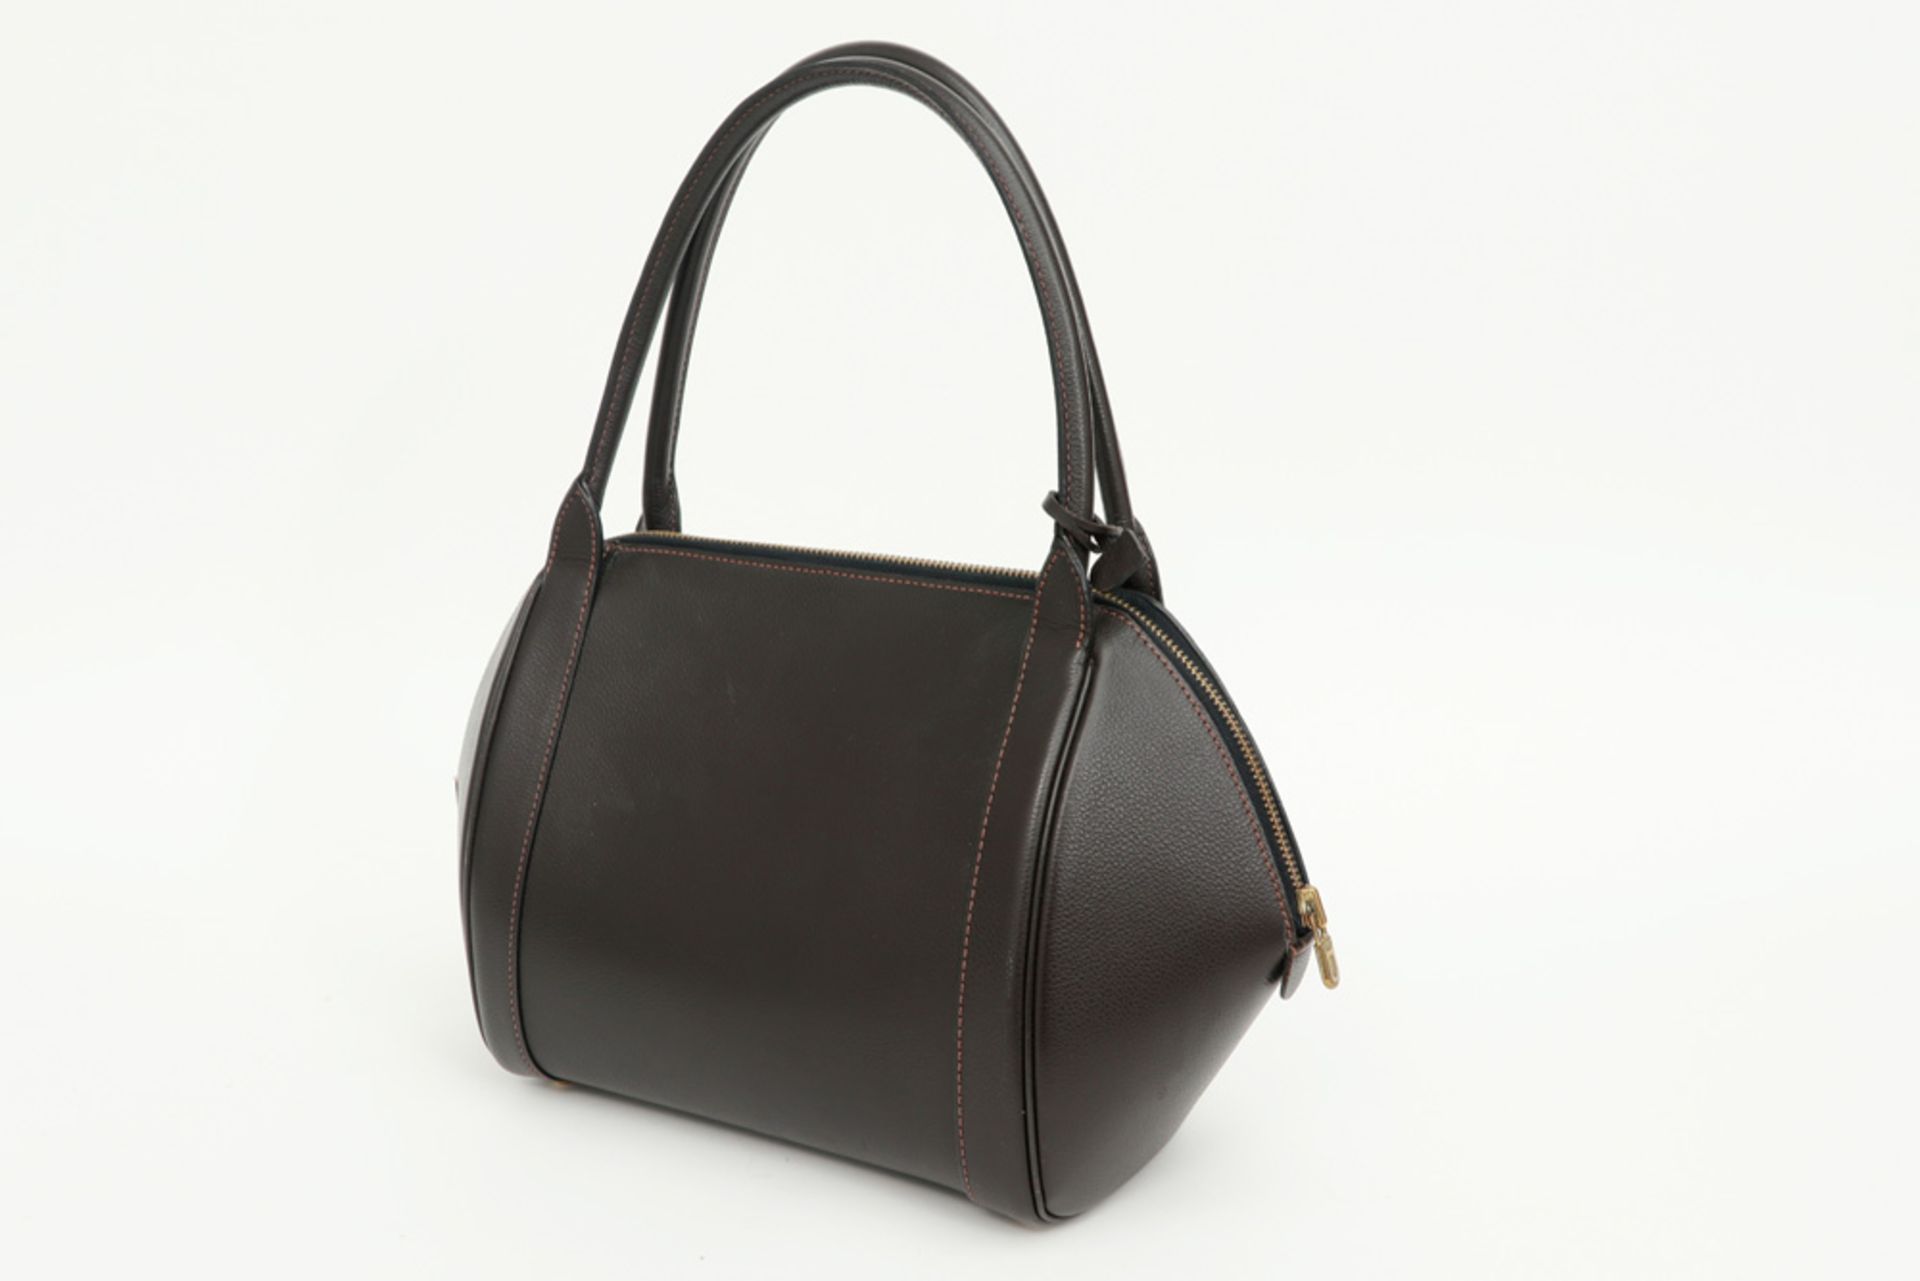 Delvaux marked handbag in brown leather